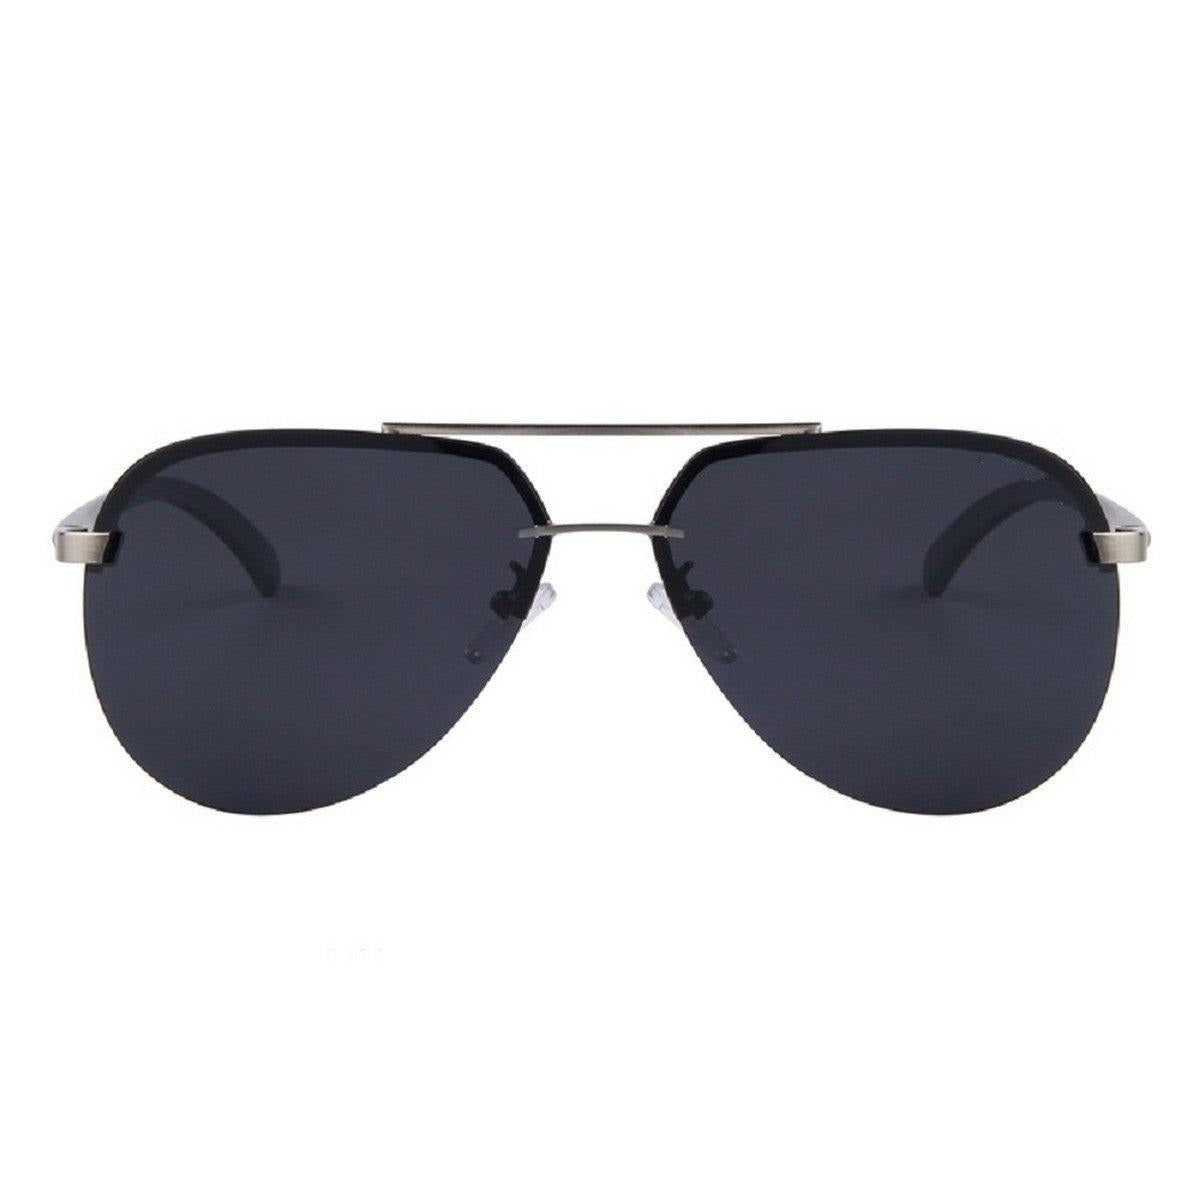 Buy HD Vision Grey Polarized Aviator Sunglasses - Glasses India Online in India